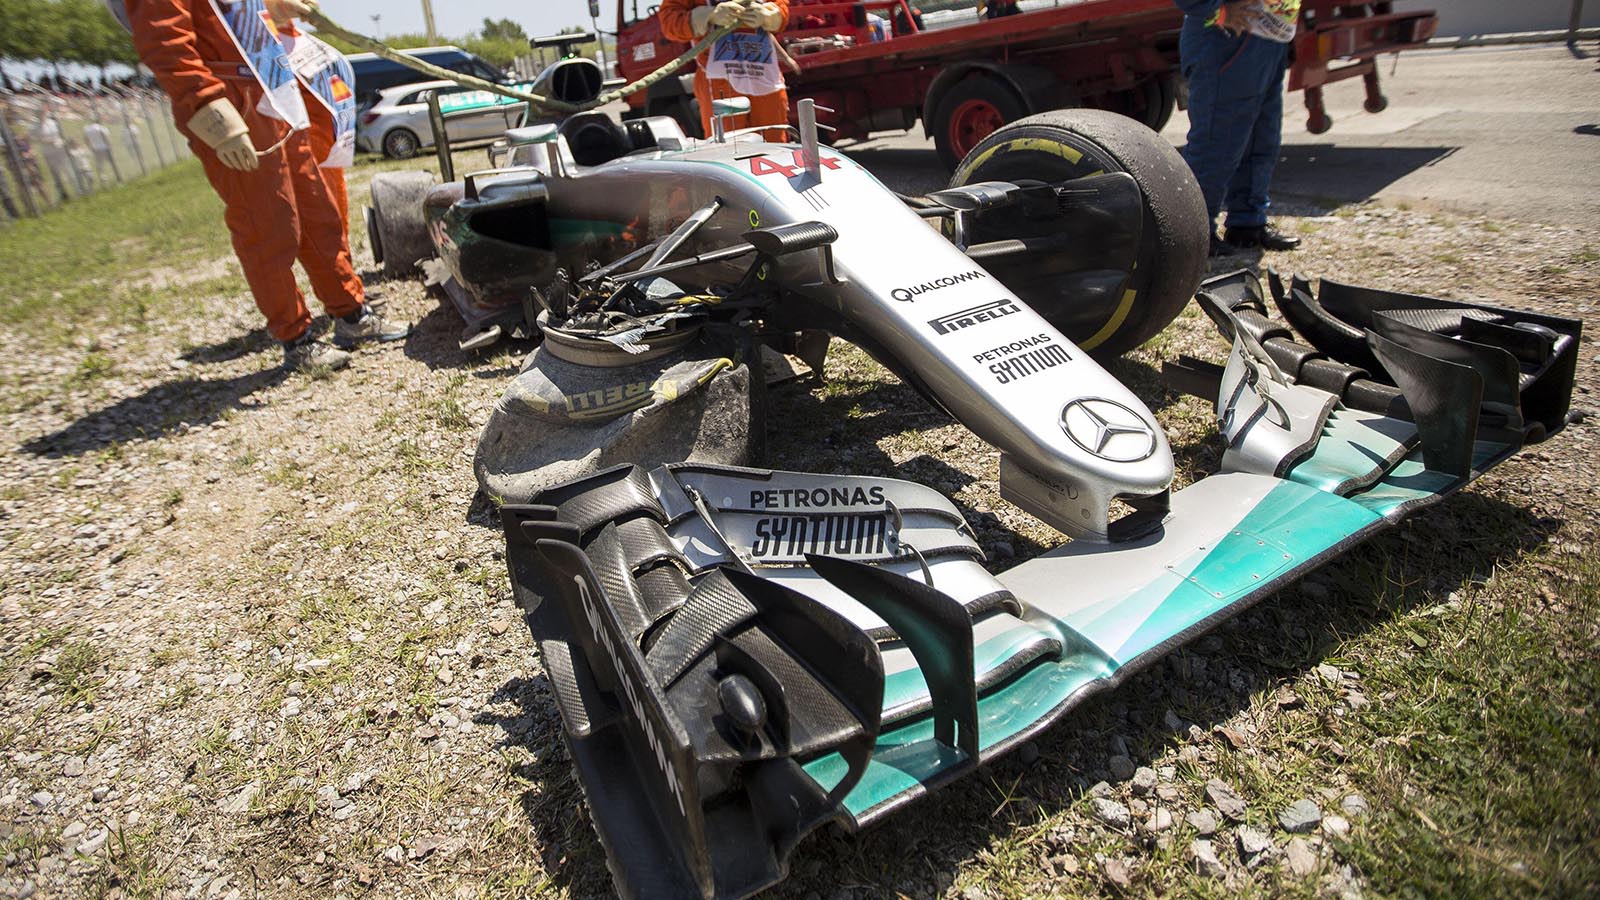 Marshals recover Lewis Hamilton's crashed car after Nico Rosberg collision